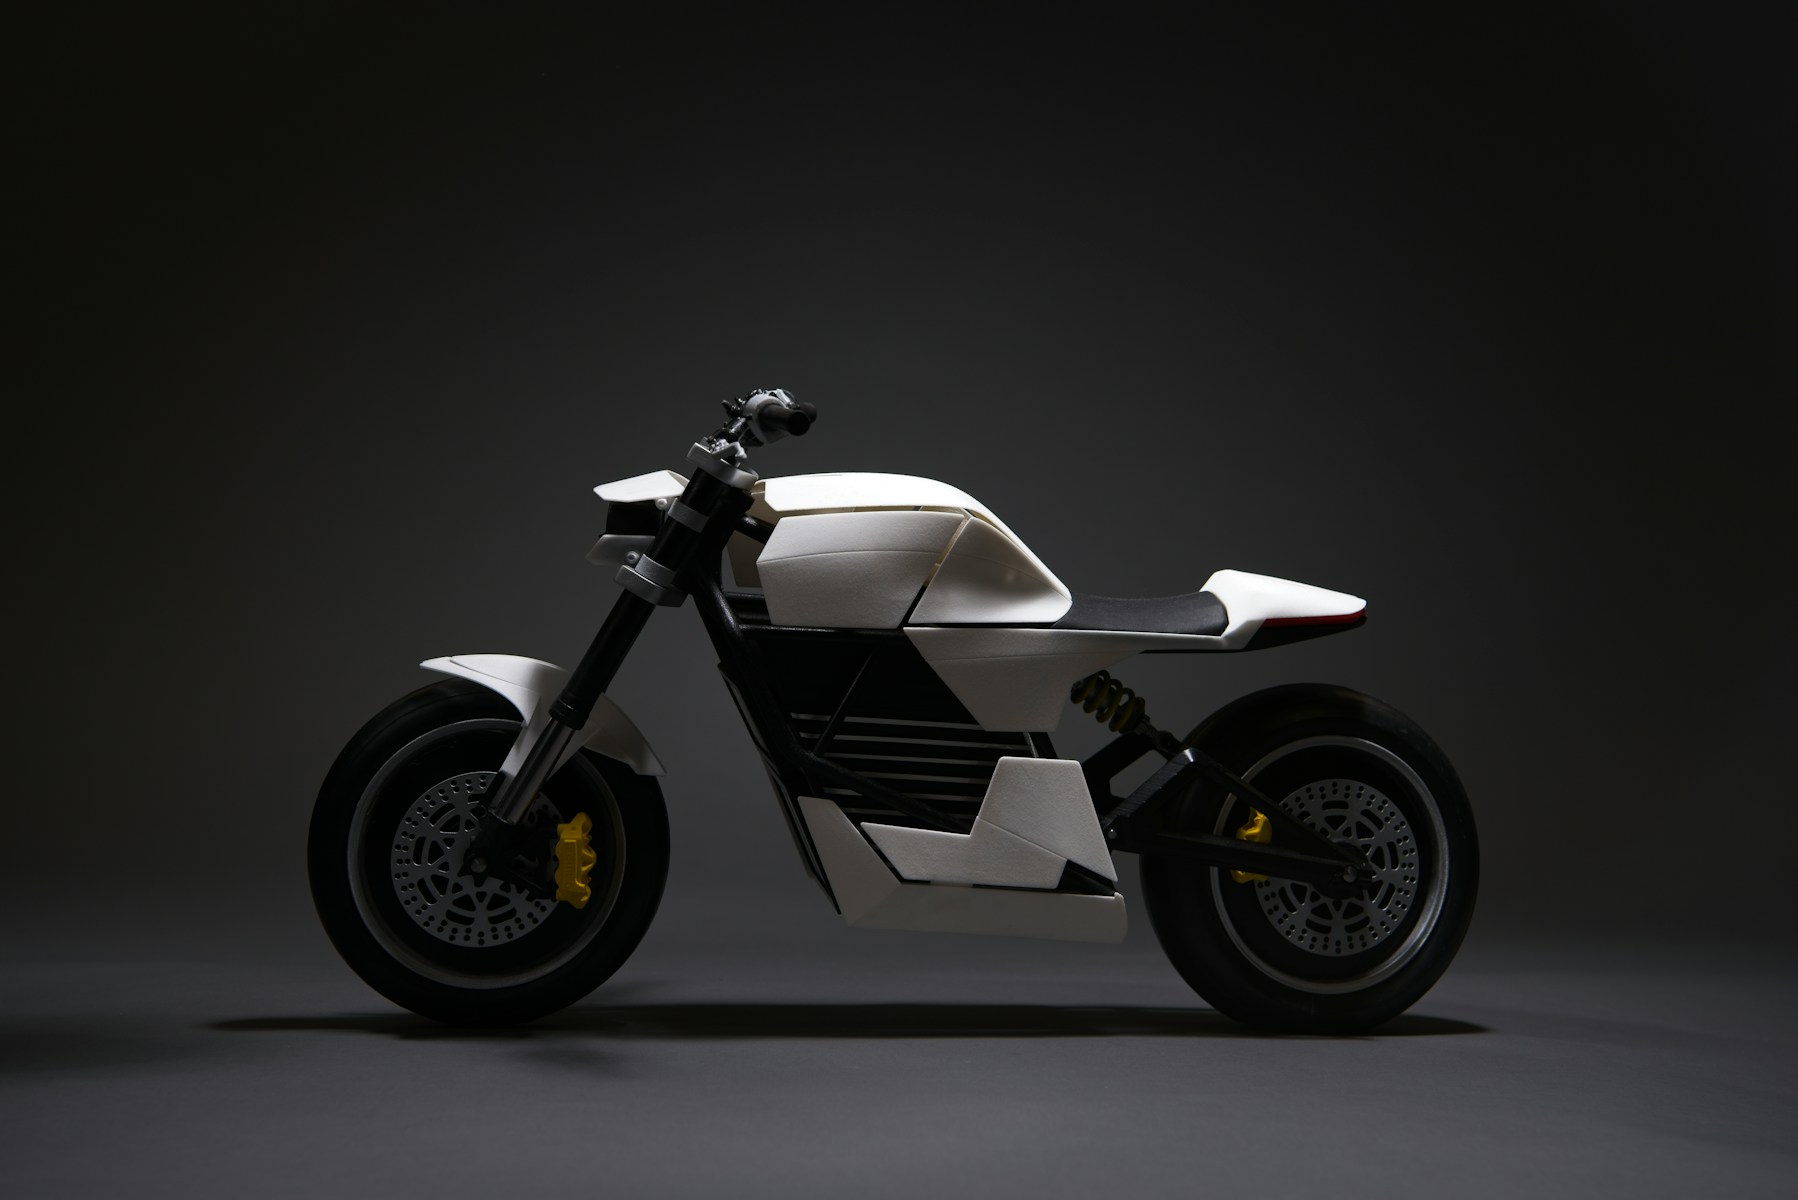 white and black motorcycle with black background